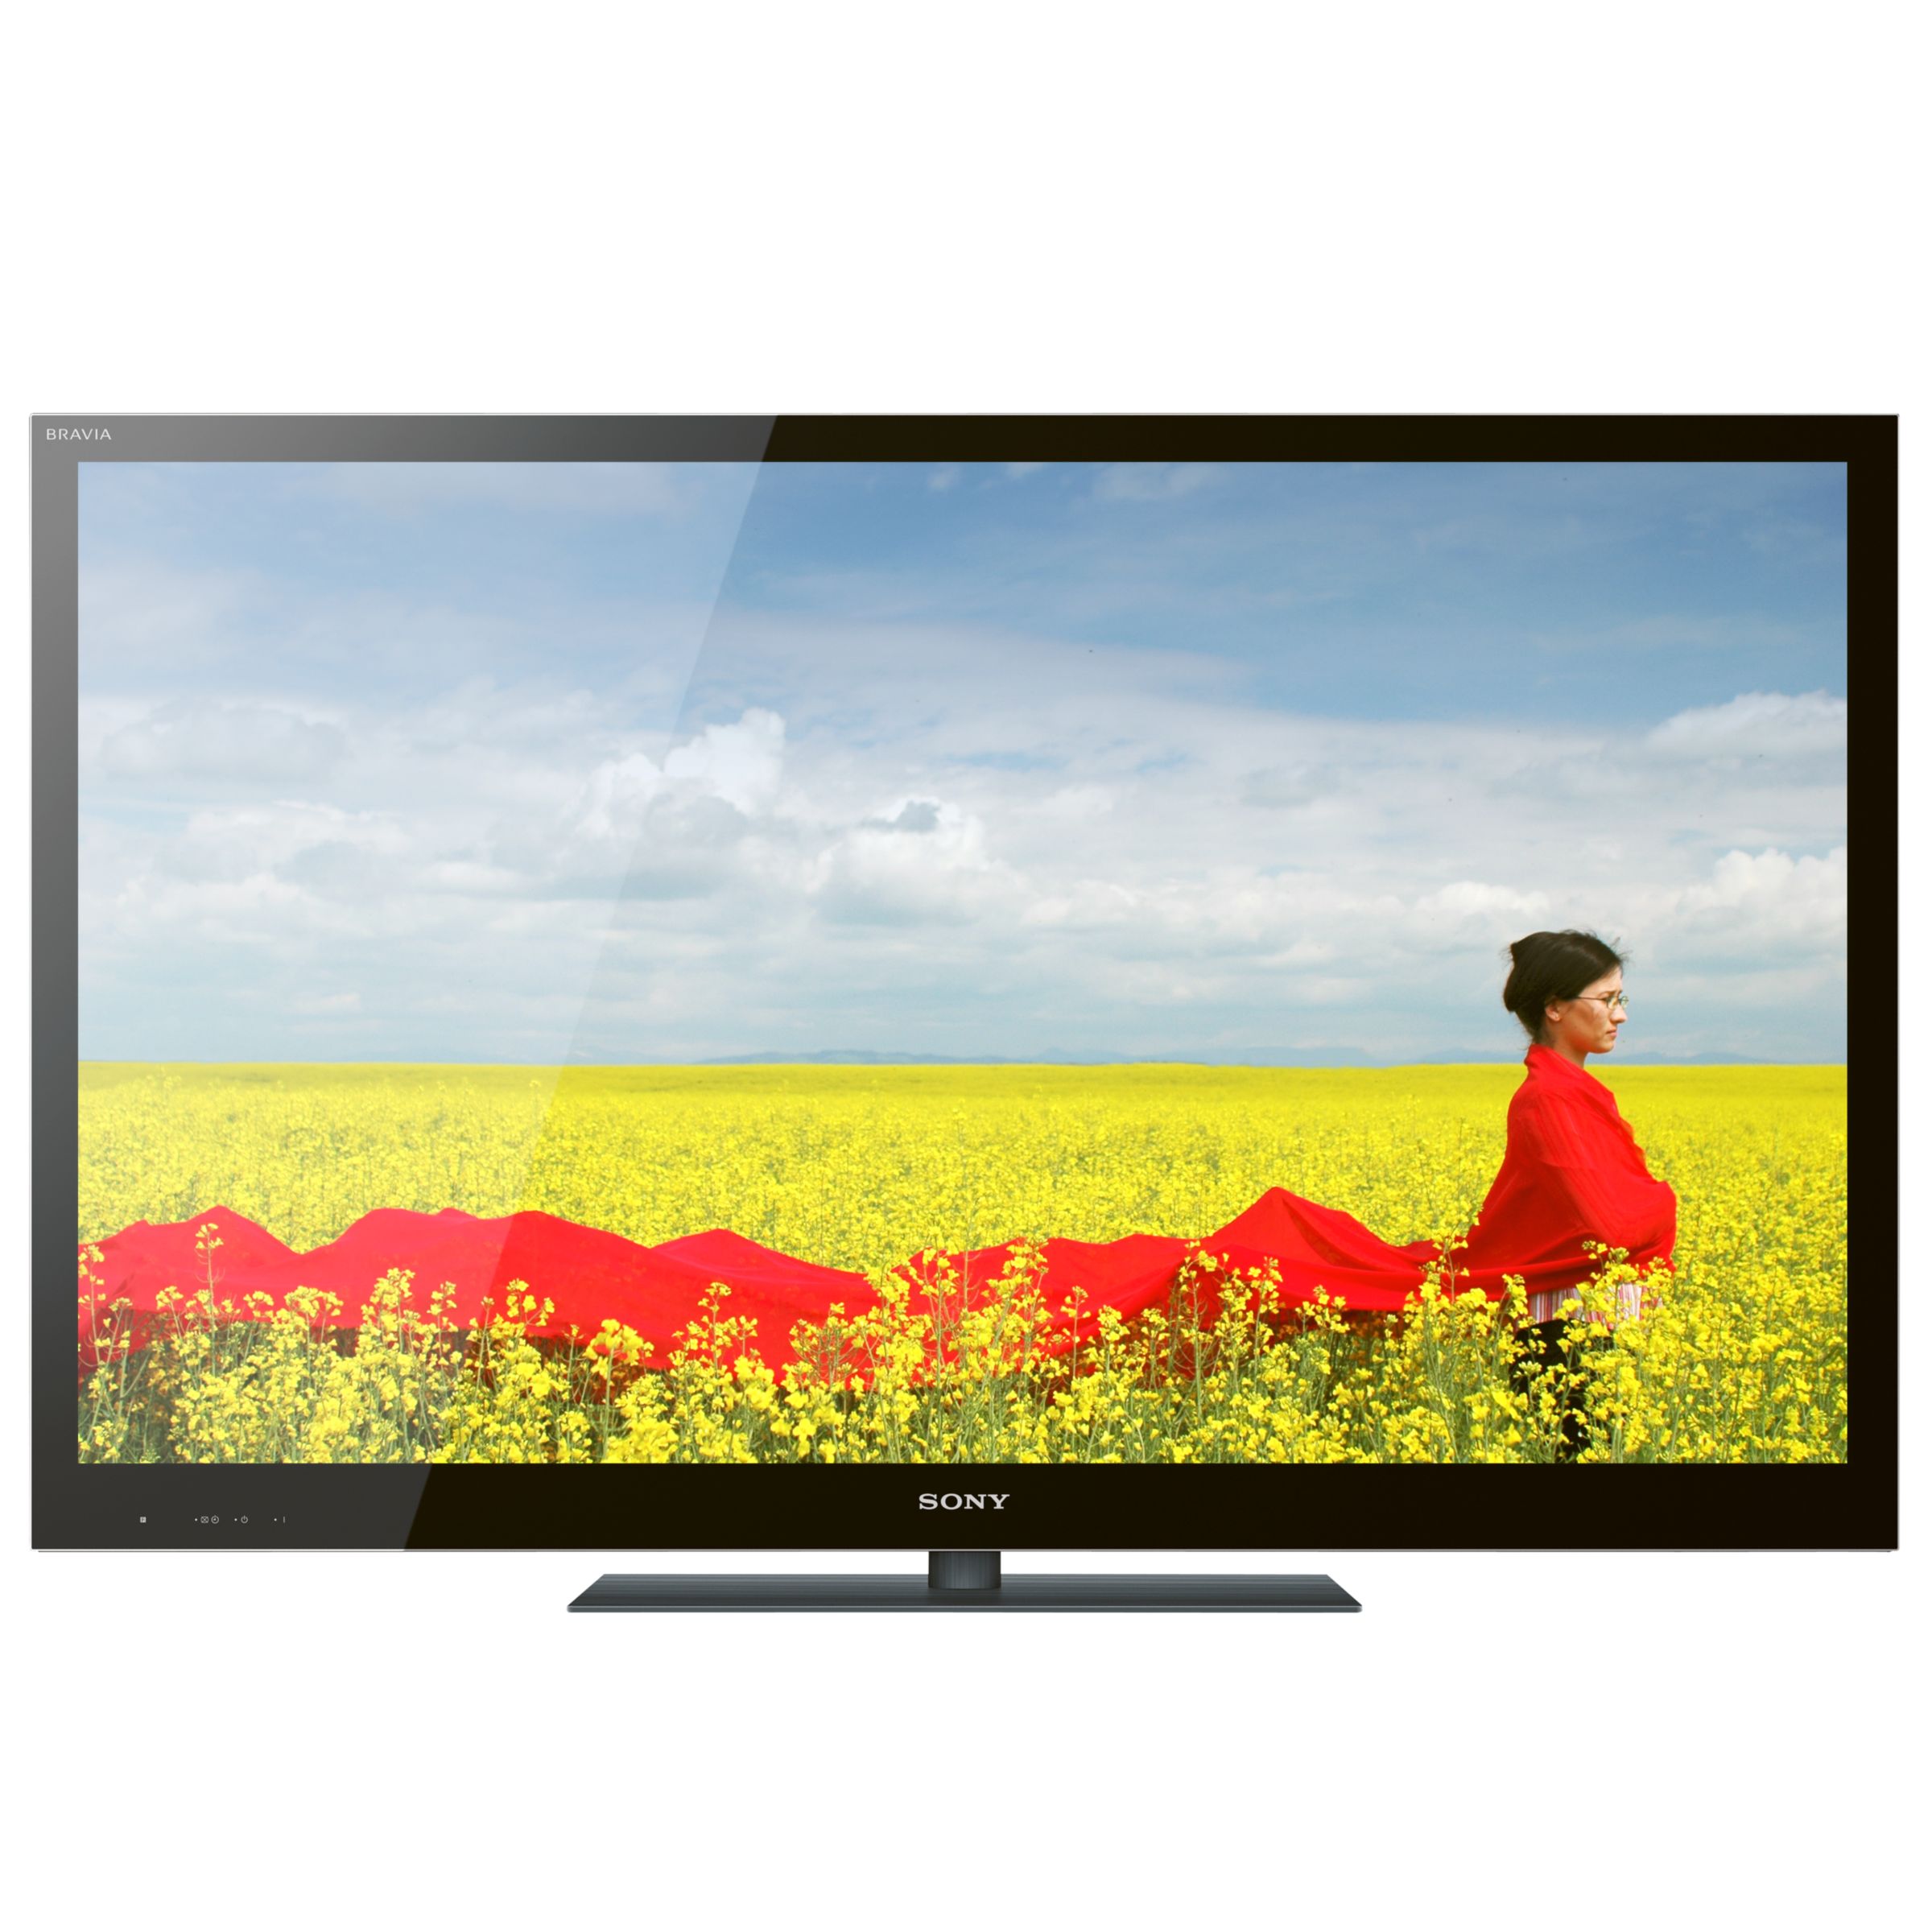 Sony Bravia KDL40NX713U LED HD 1080p 3D Capable Television, 40 inch with Built-in Freeview HD at John Lewis